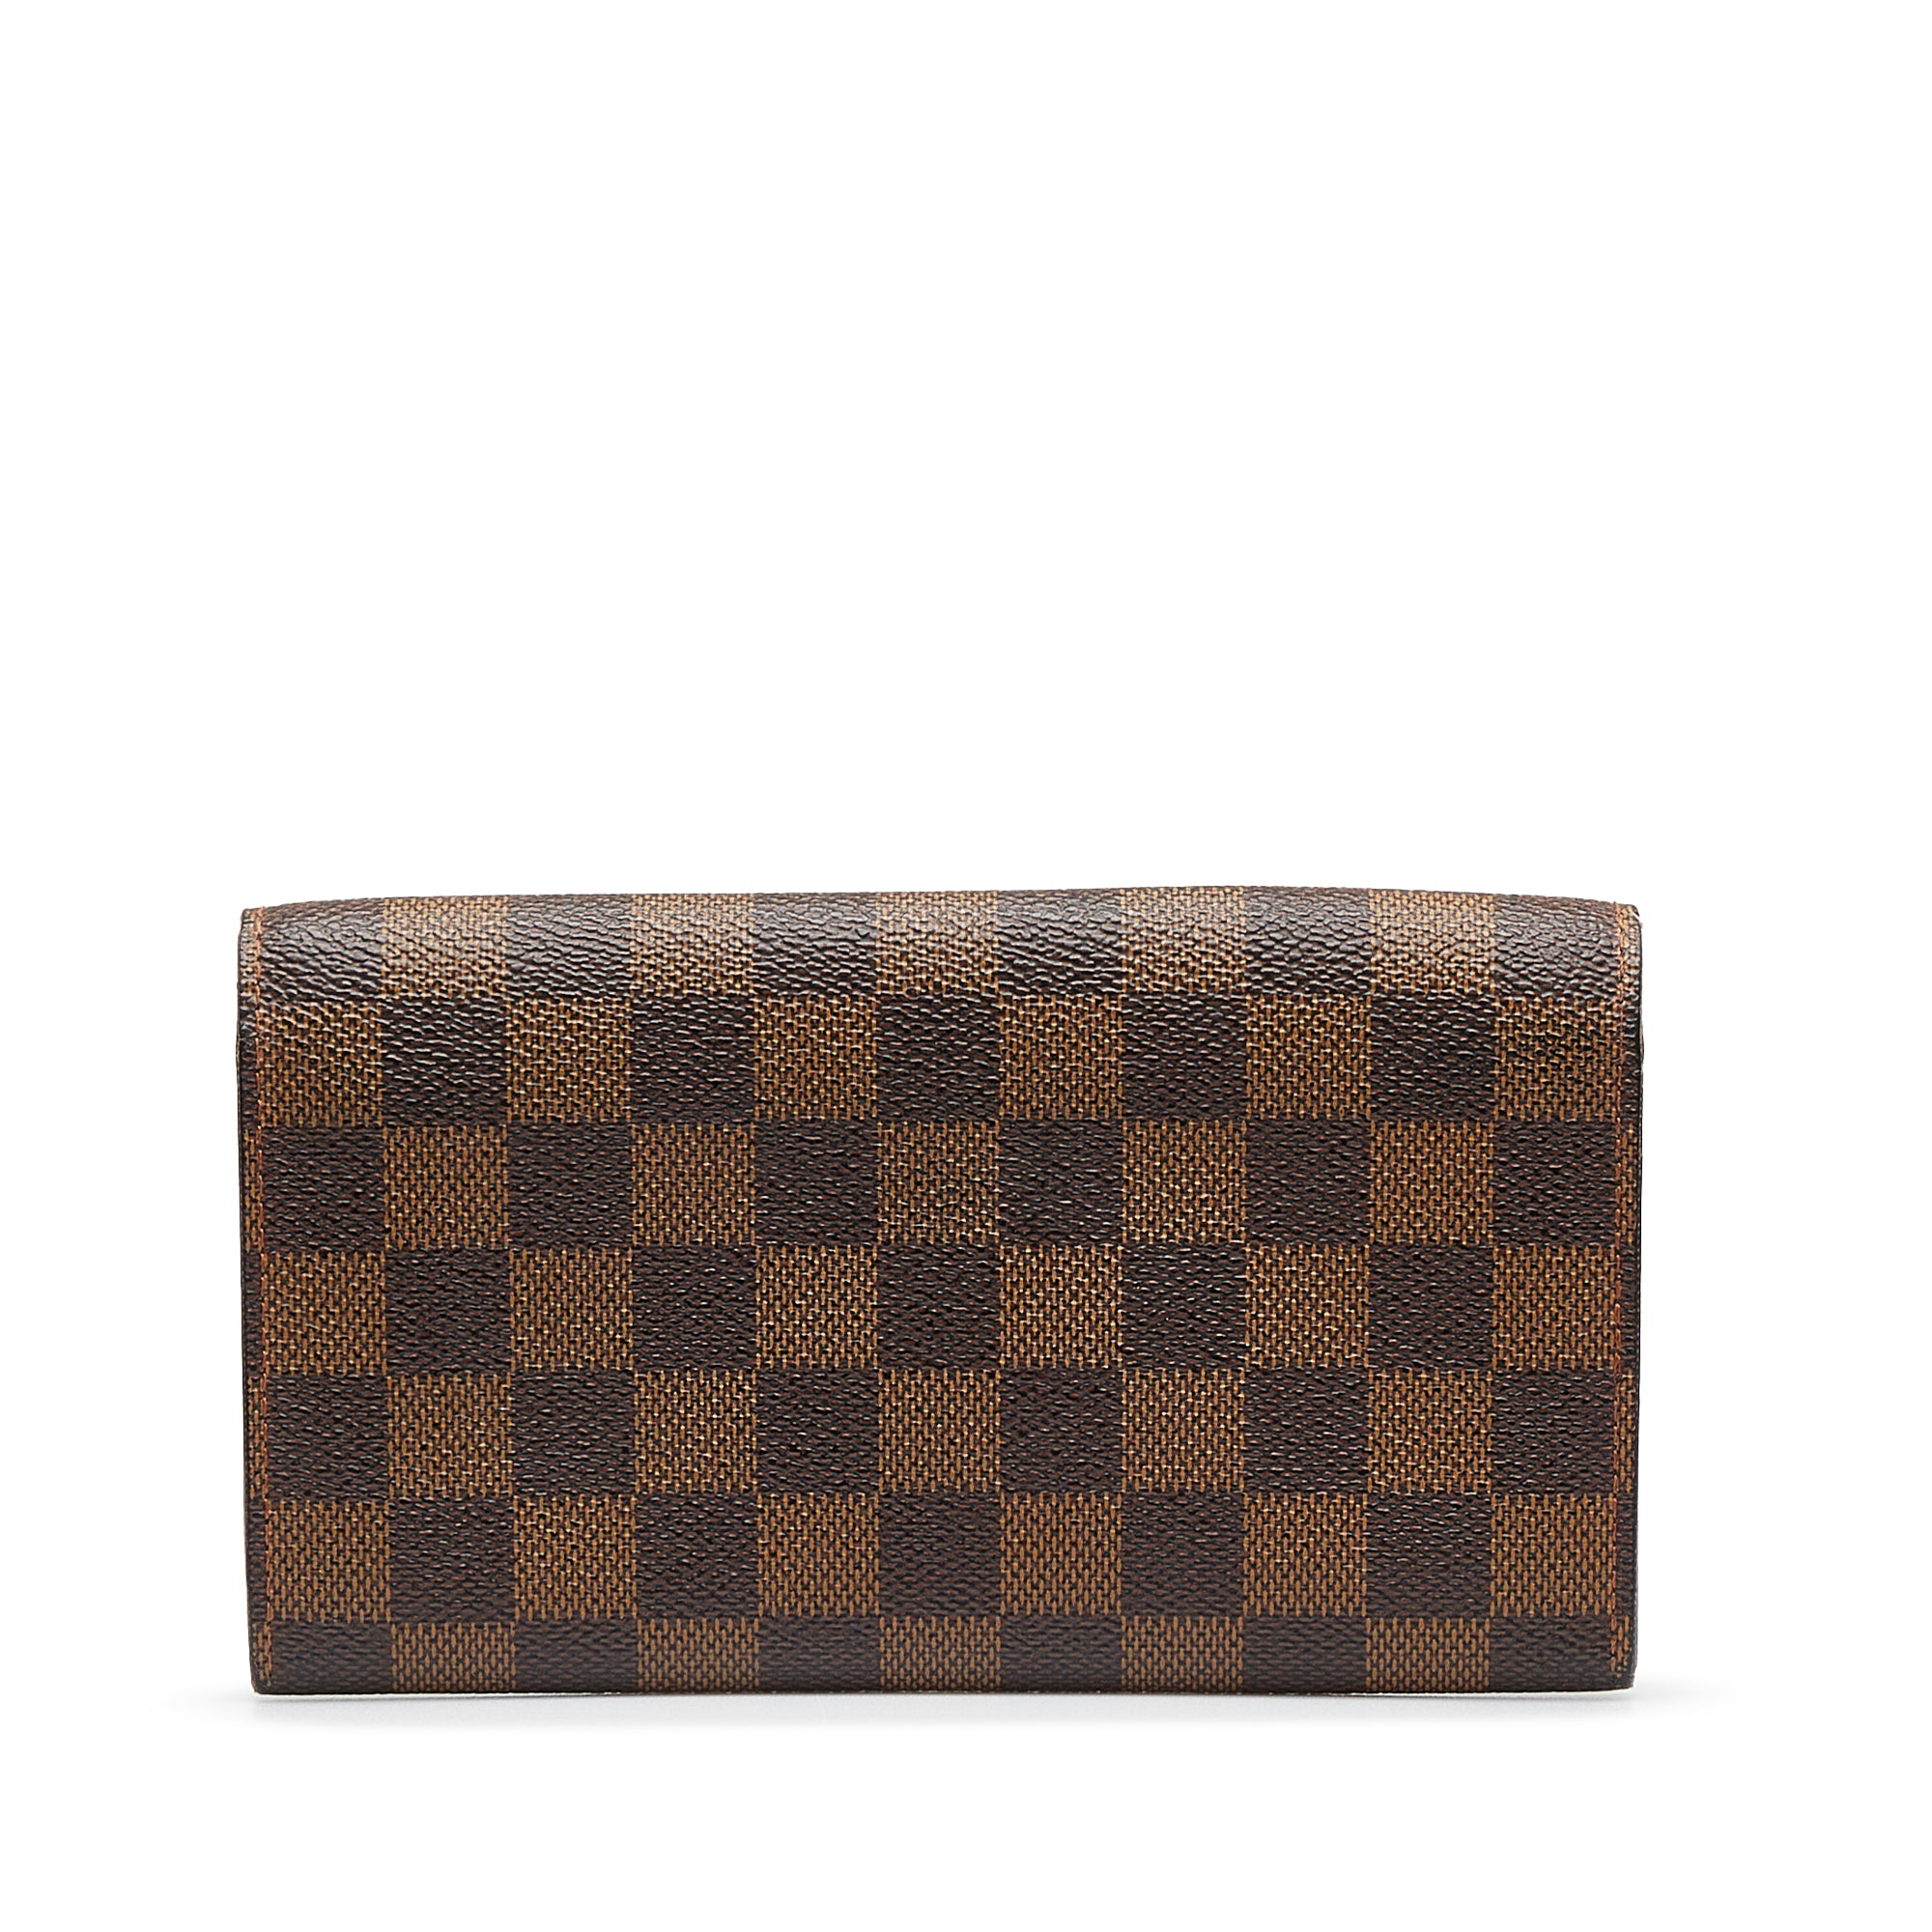 Louis Vuitton - Authenticated Sarah Wallet - Leather Brown for Women, Very Good Condition